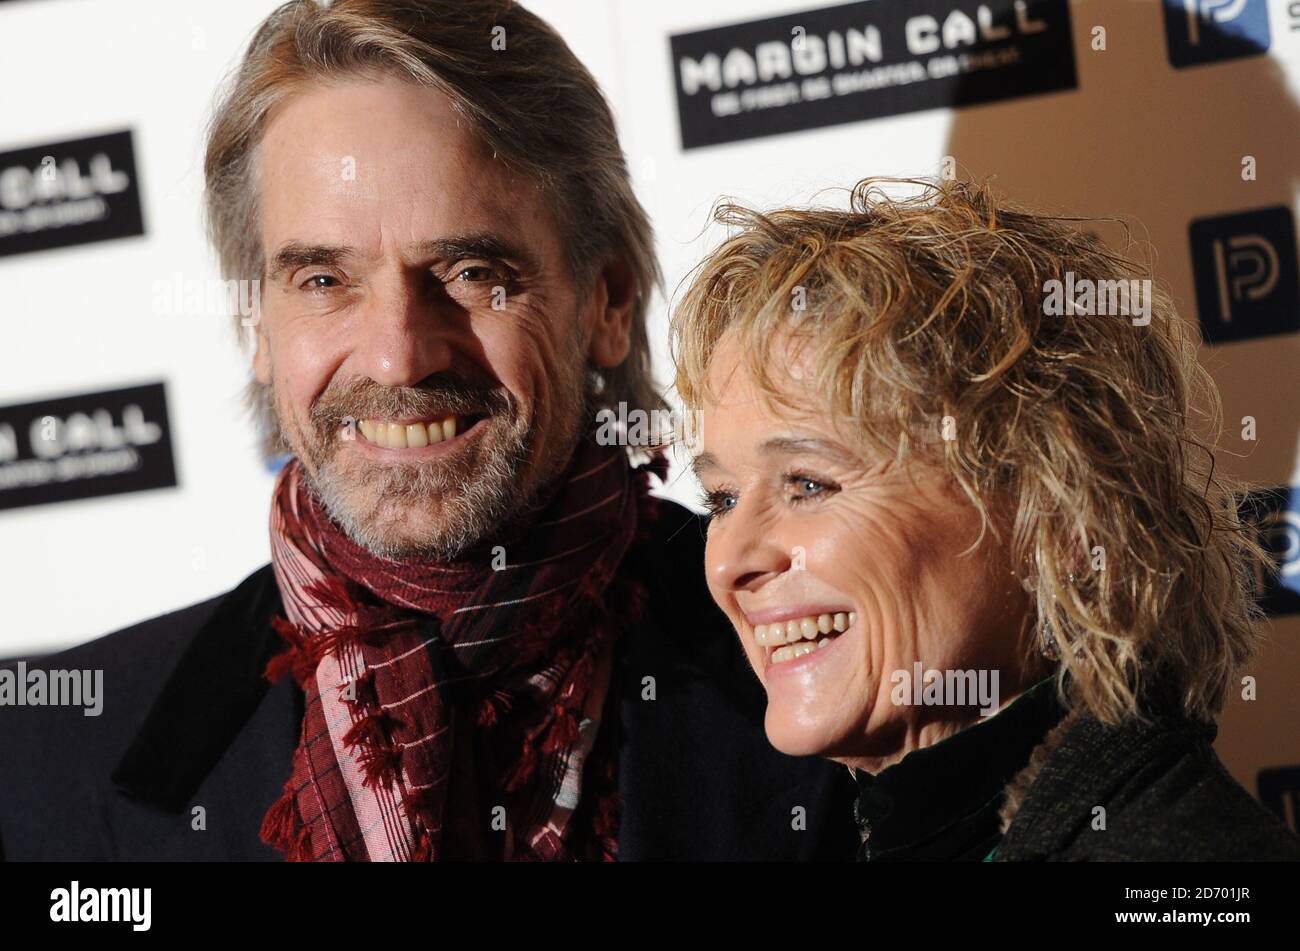 Jeremy Irons and Sinead Cusack arrive at the premiere of Margin Call at the Vue cinema in London Stock Photo